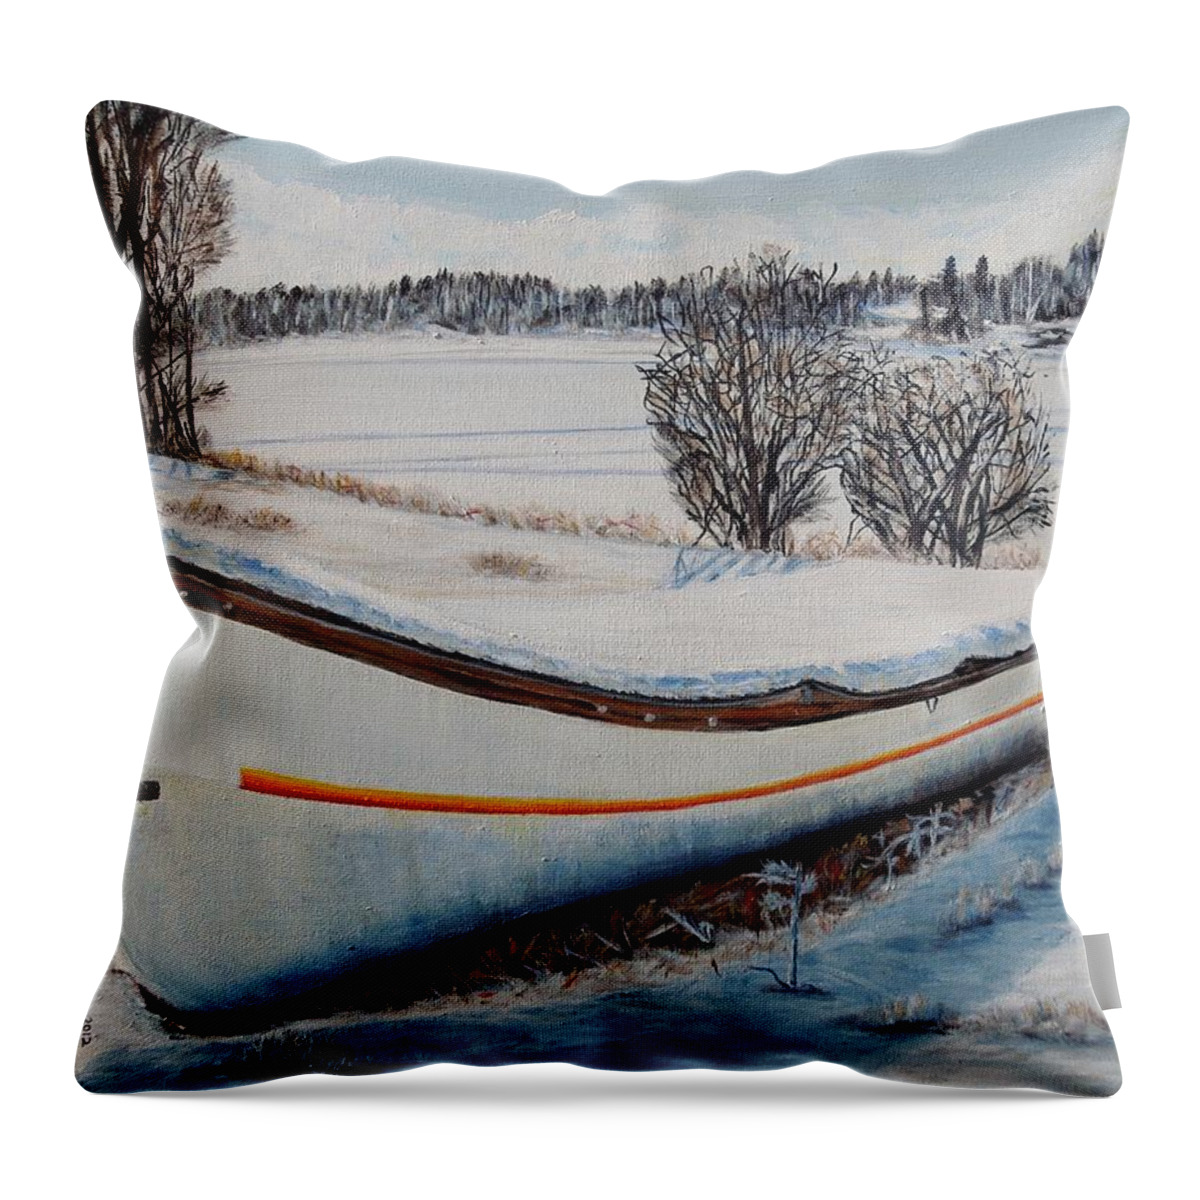 Boat Throw Pillow featuring the painting Boat under snow by Marilyn McNish